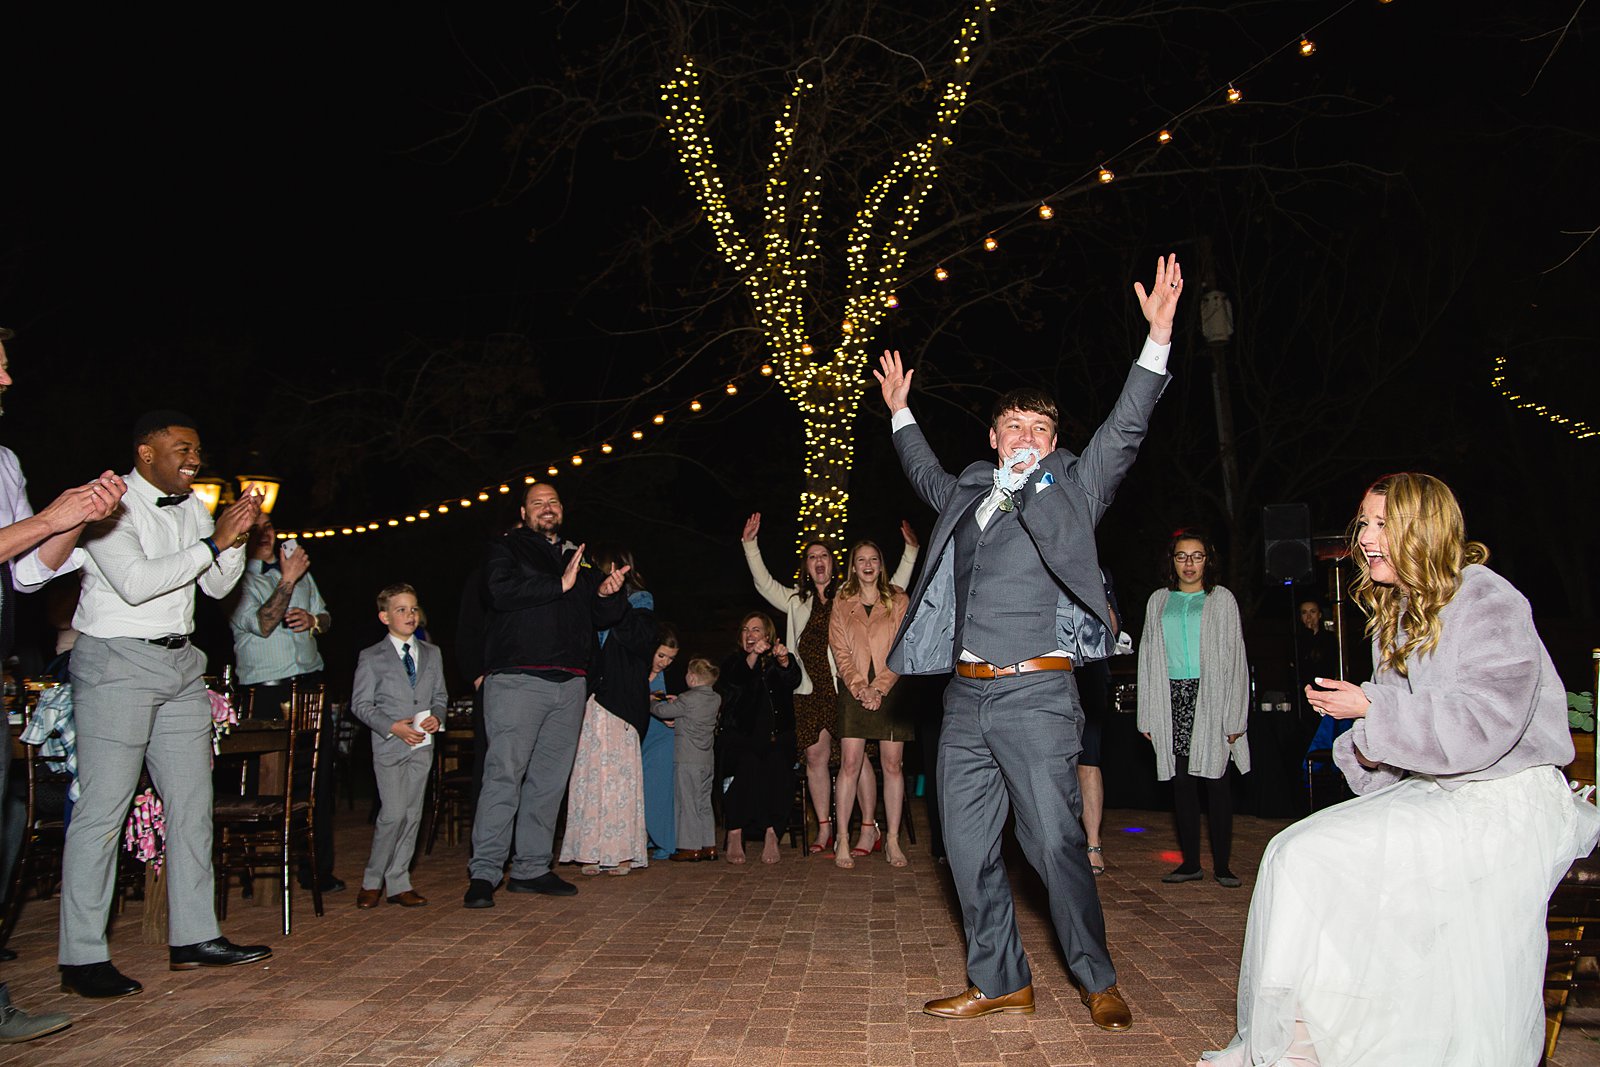 Garter toss at Venue At The Grove wedding reception by Phoenix wedding photographer PMA Photography.